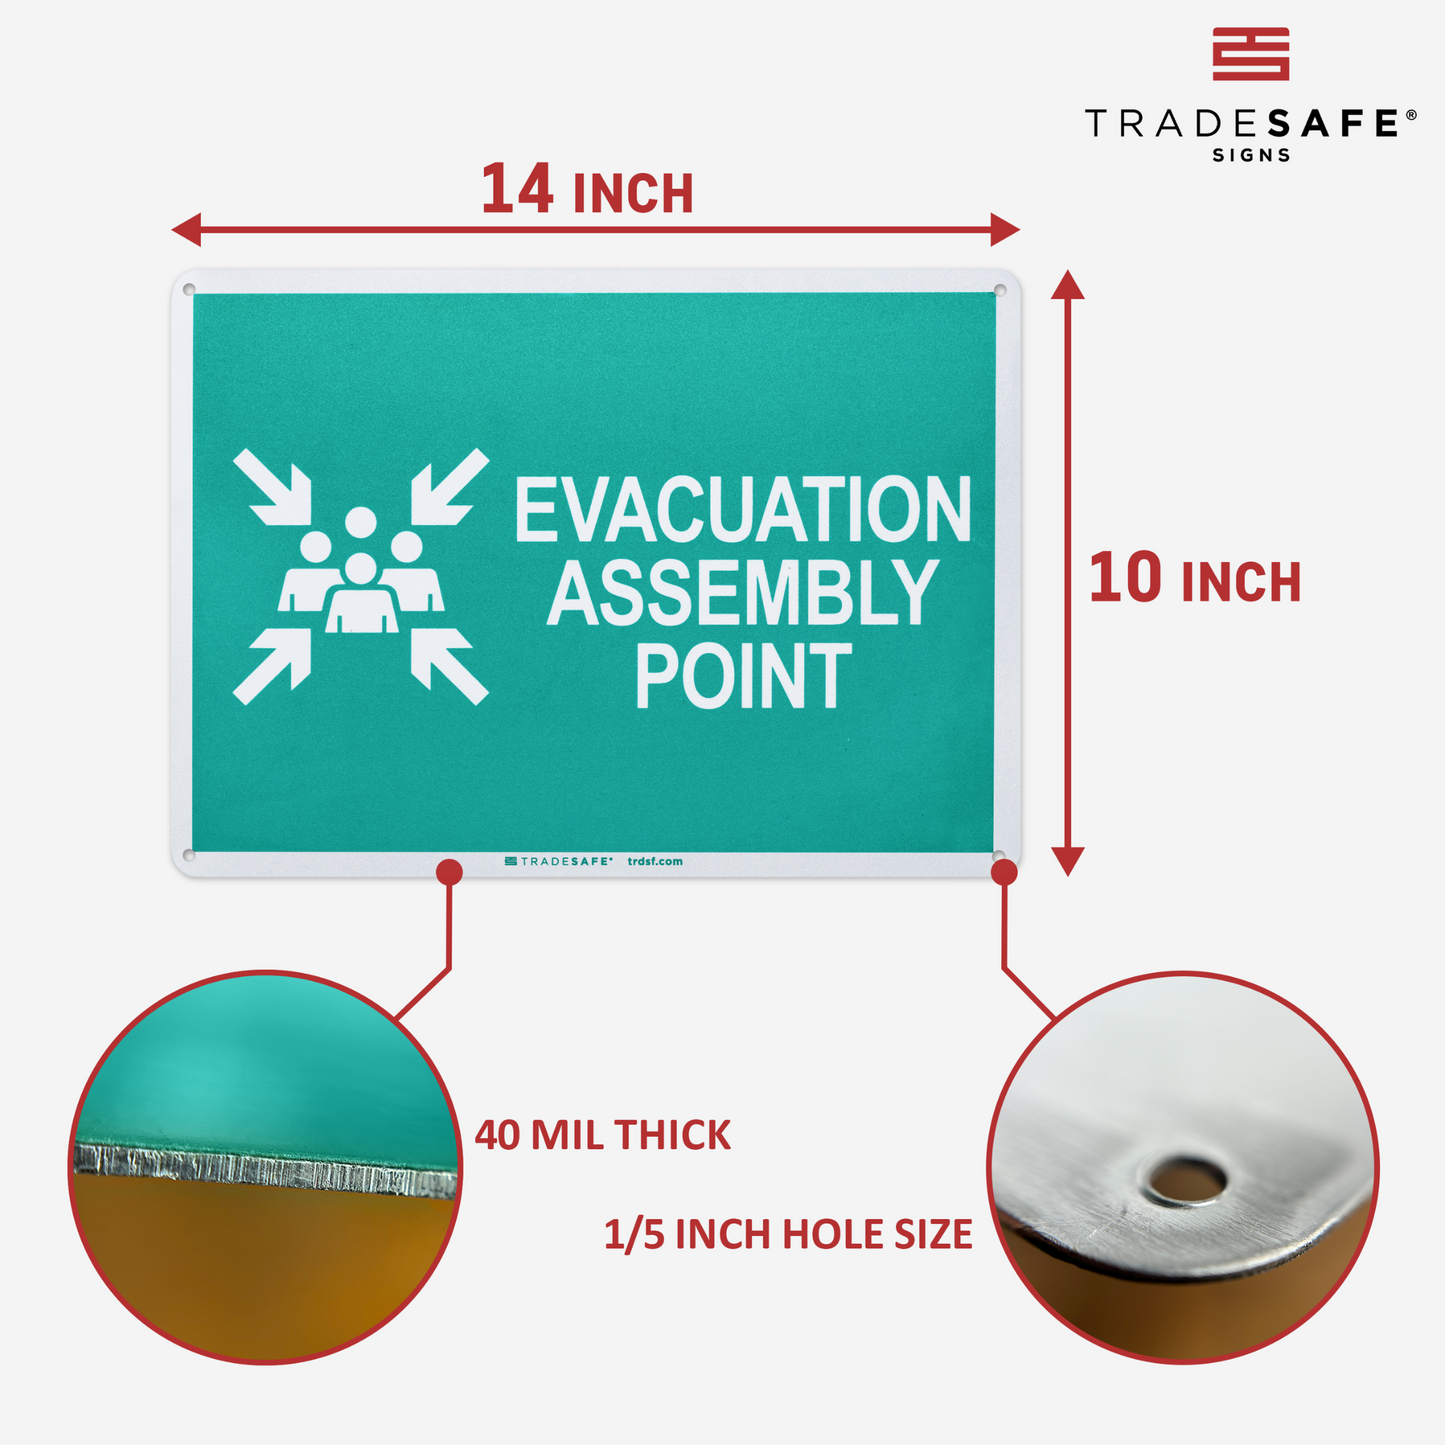 dimensions of evacuation assembly point sign